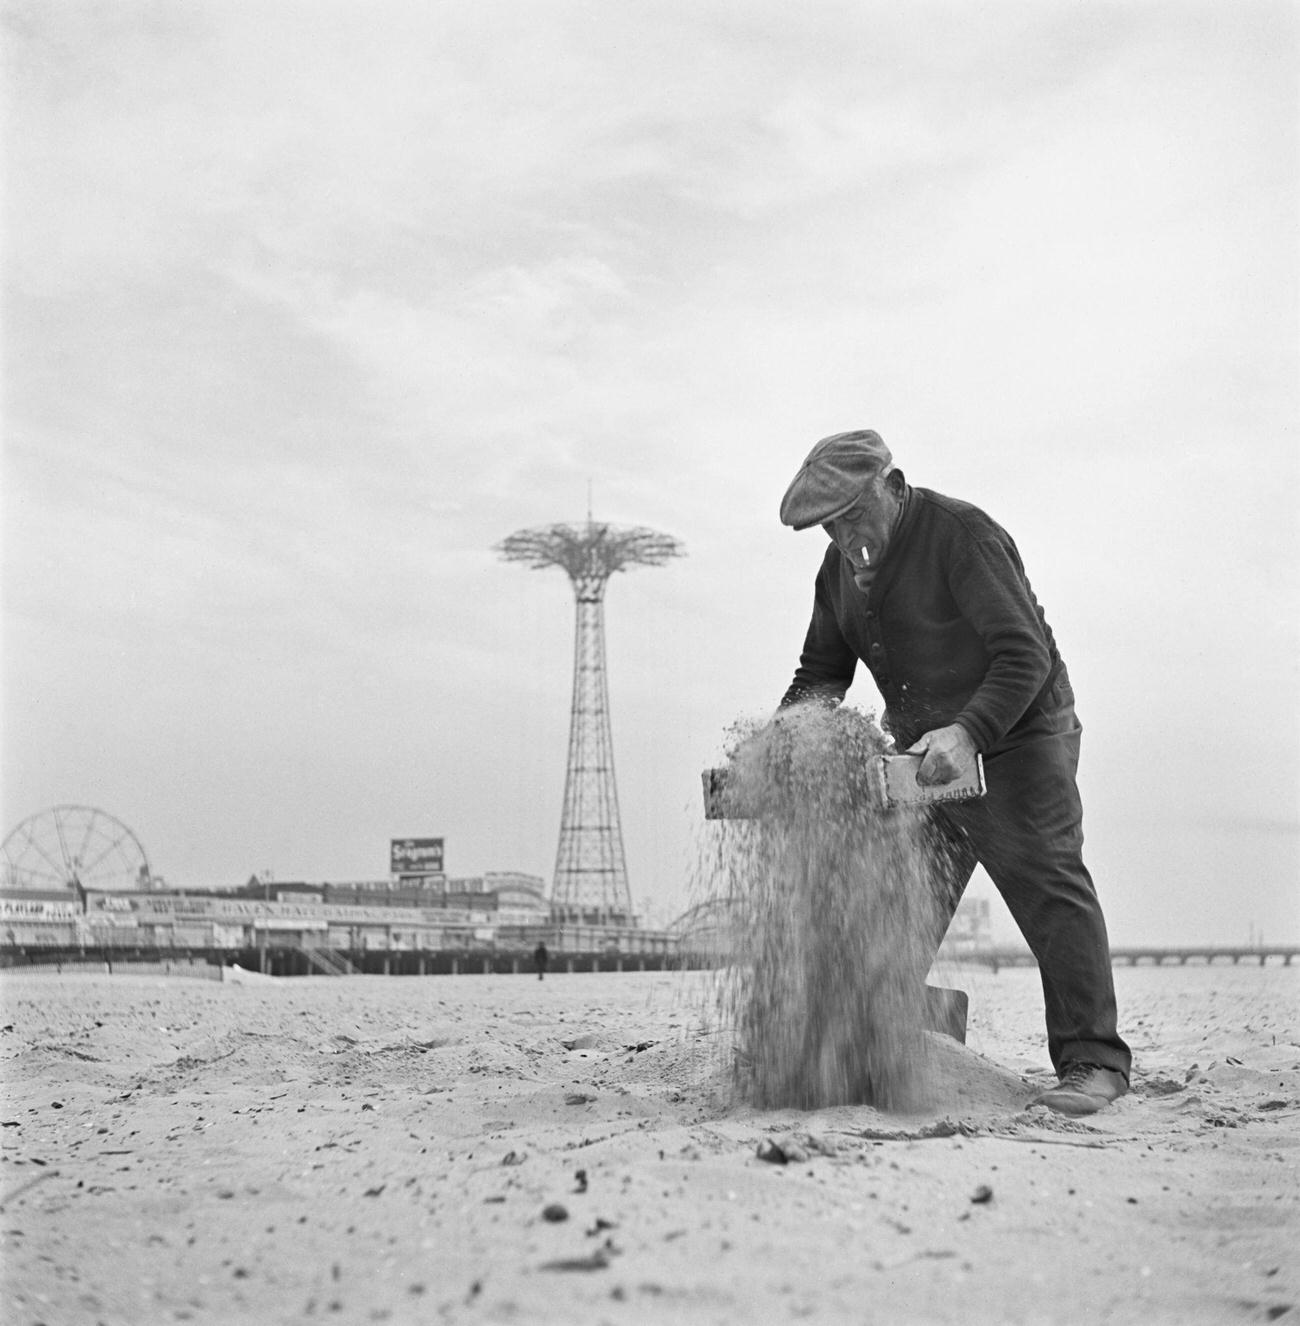 Beachcomber Sifting Sand With Parachute Jump In Background At Coney Island, 1950